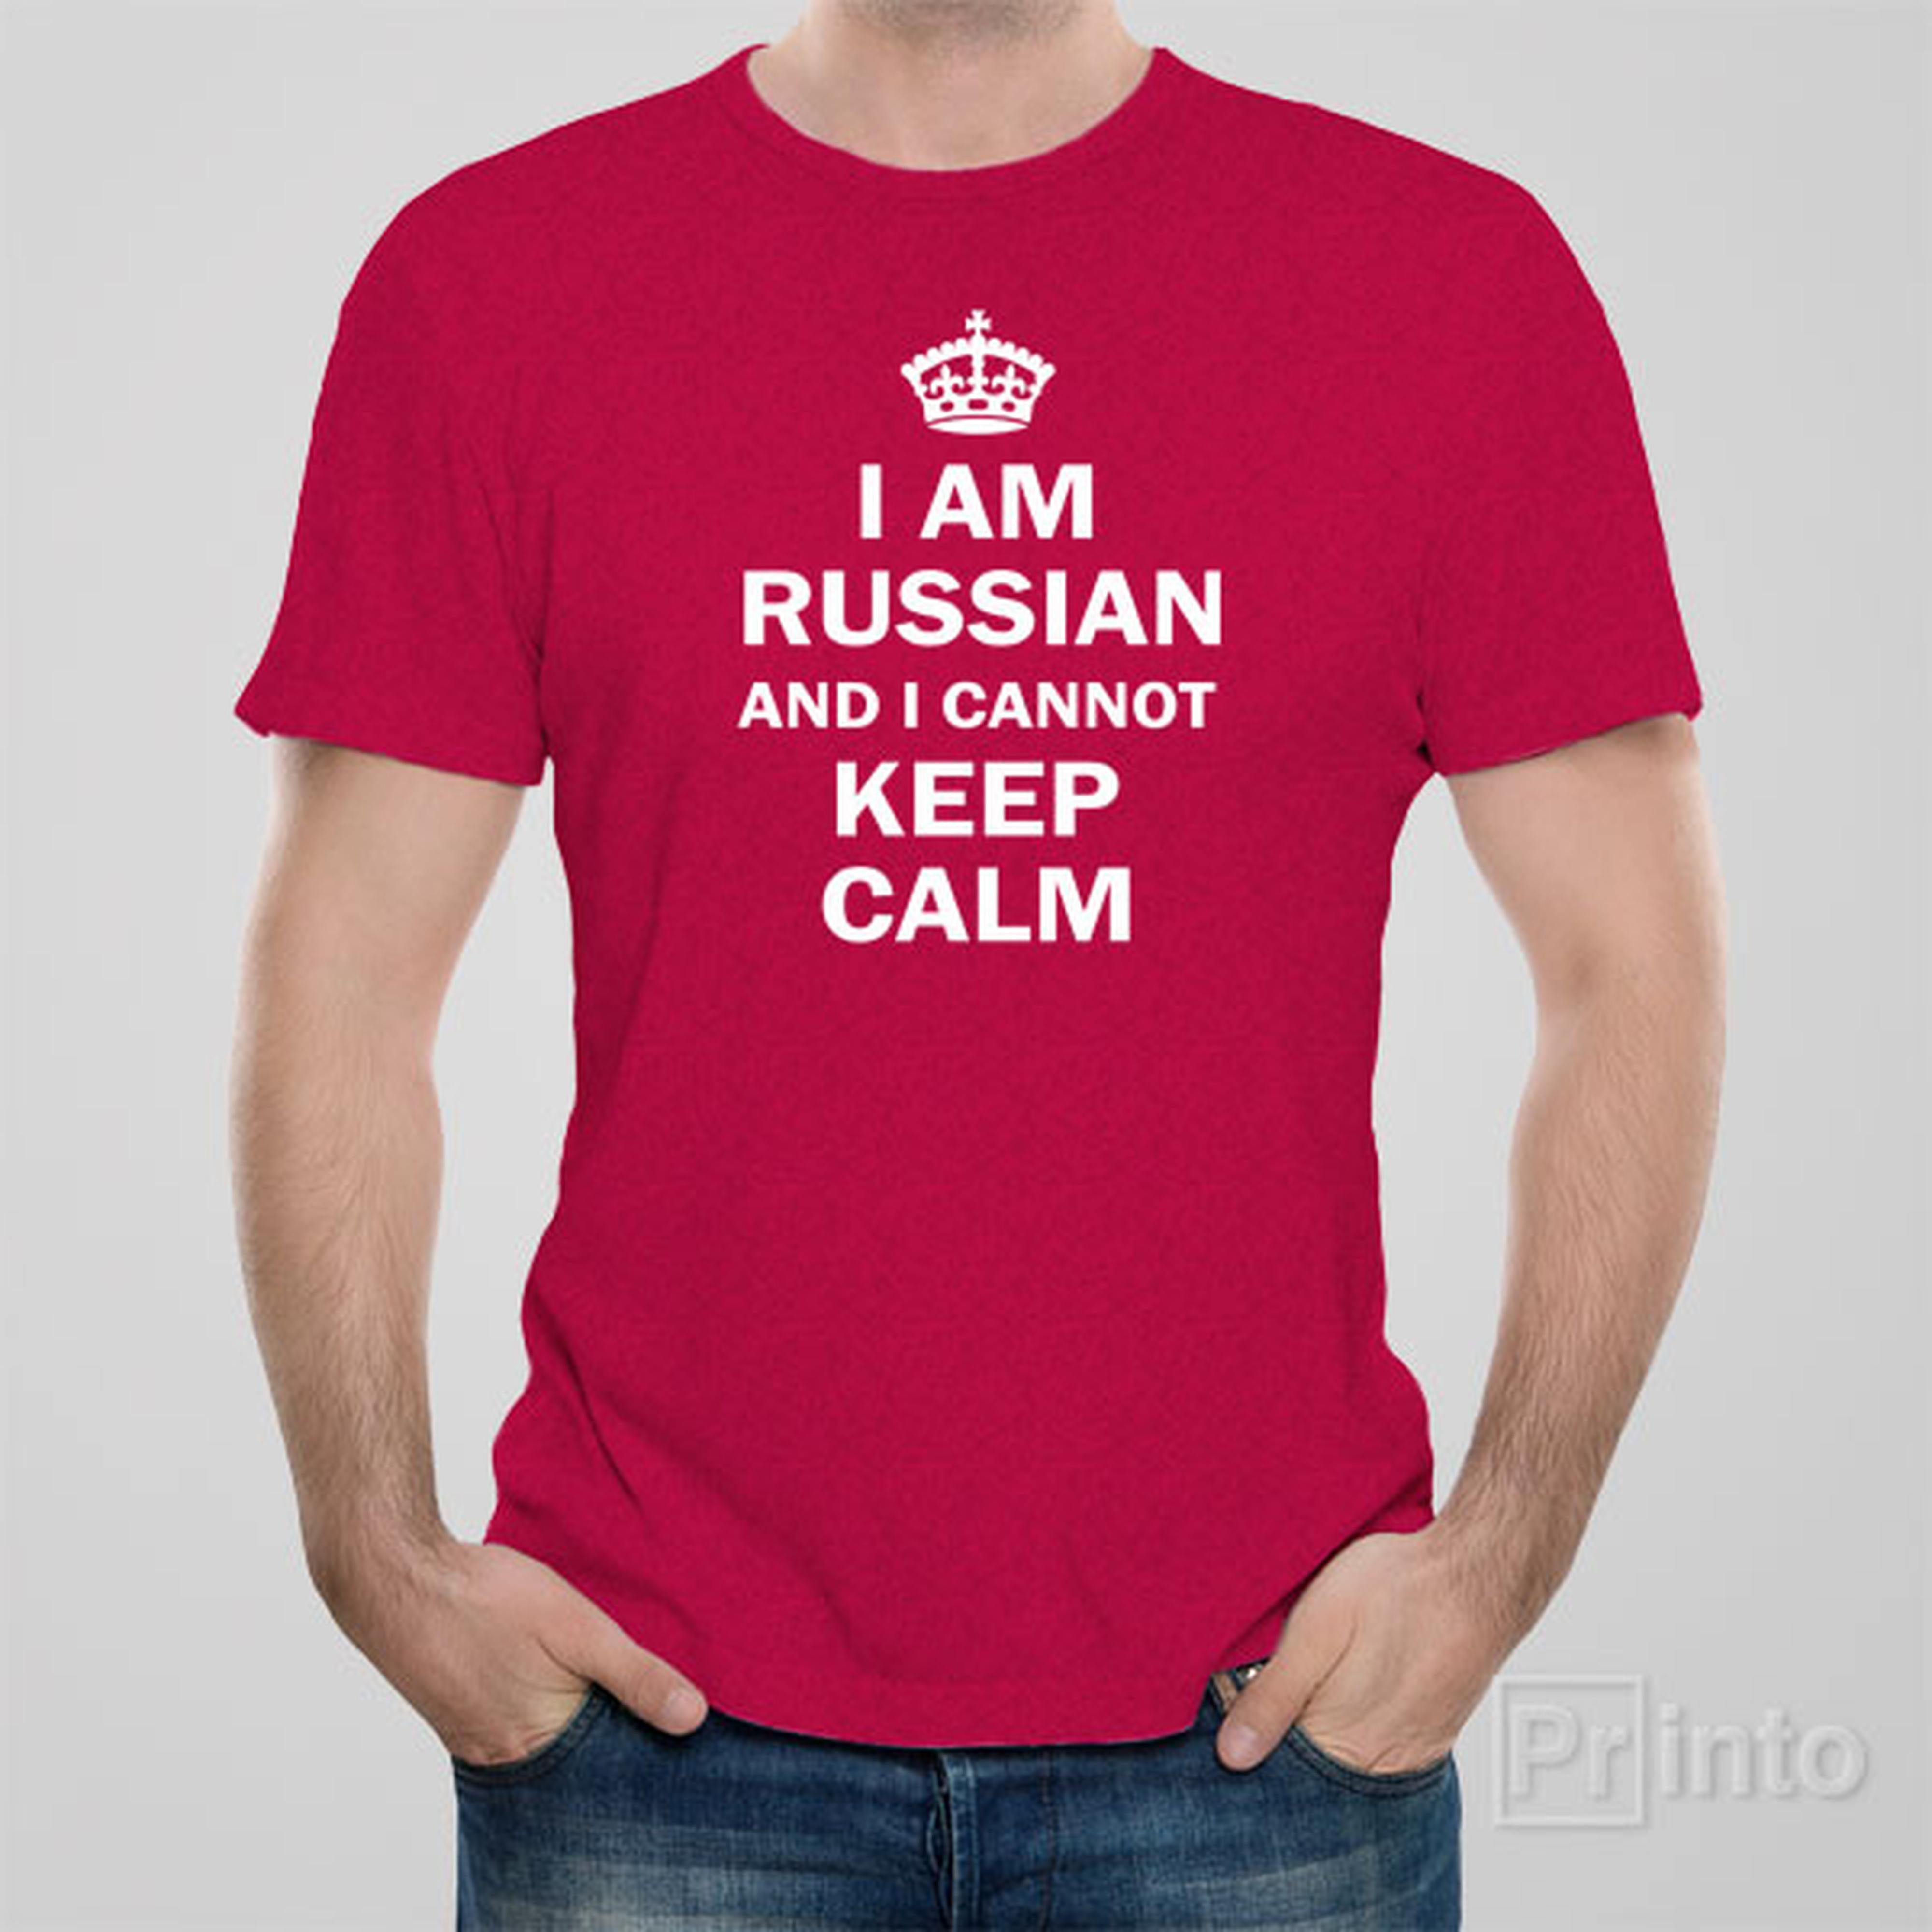 i-am-russian-and-i-cannot-keep-calm-t-shirt